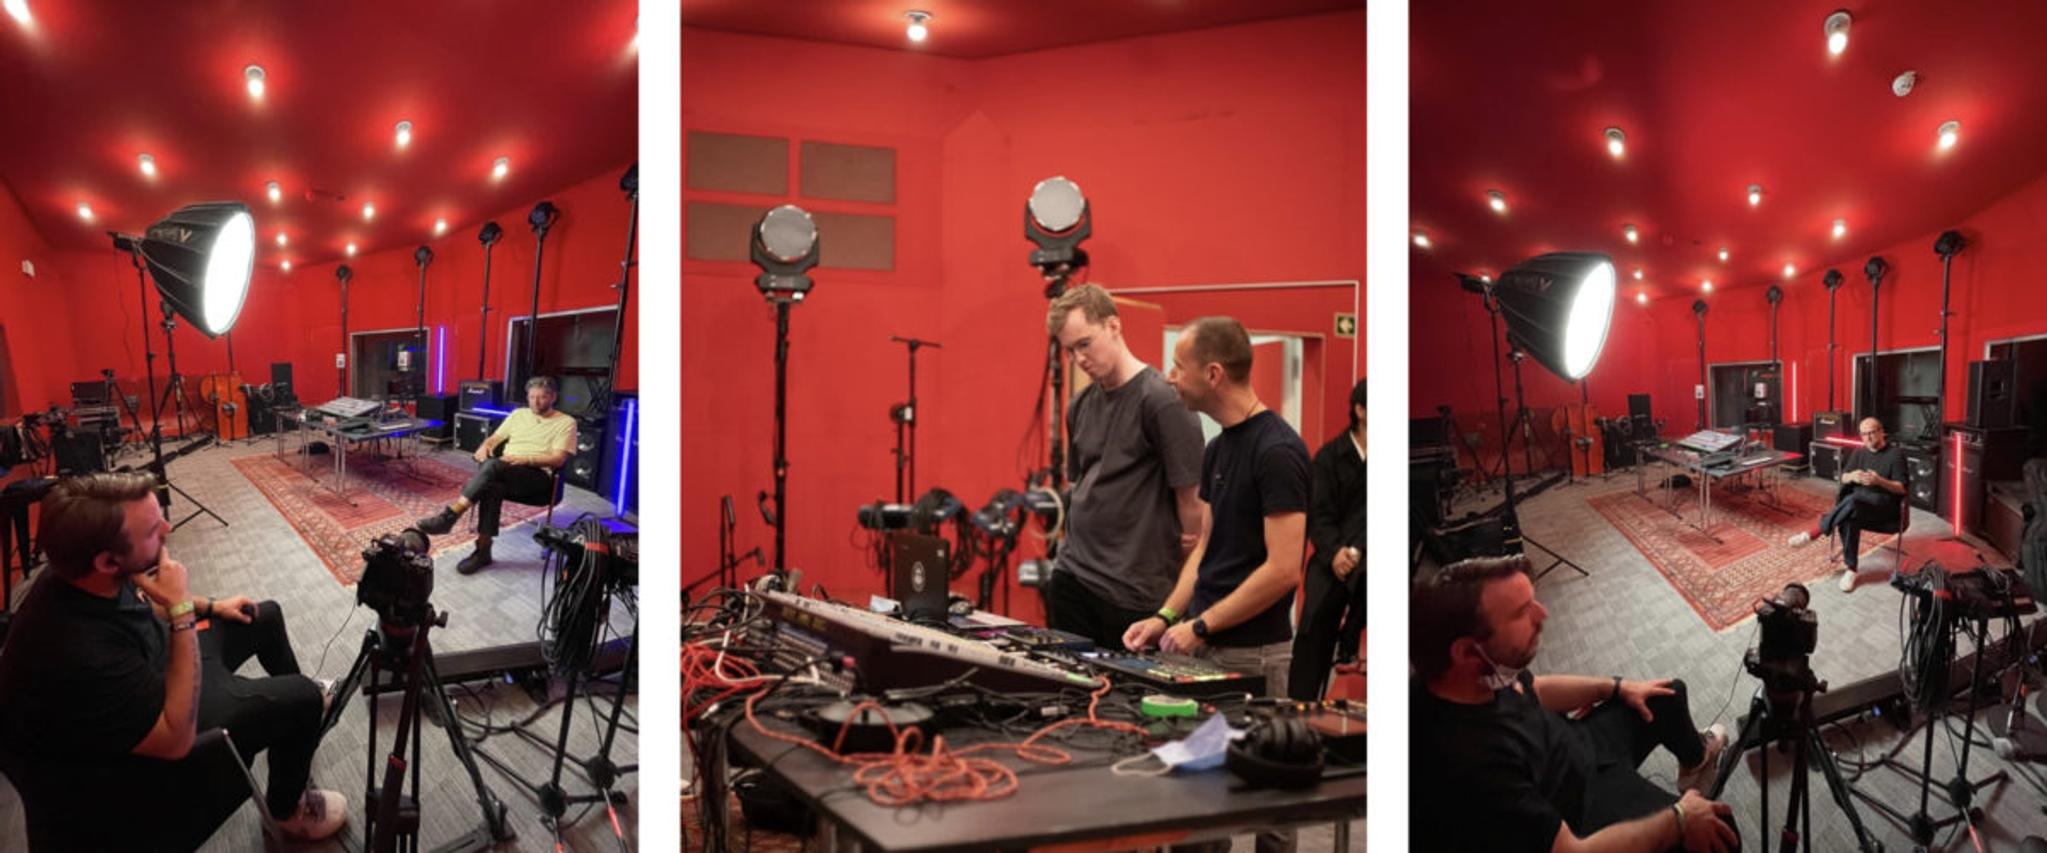 A tryptic of 3 images of a red room with musicians, cameras and studio lighting.